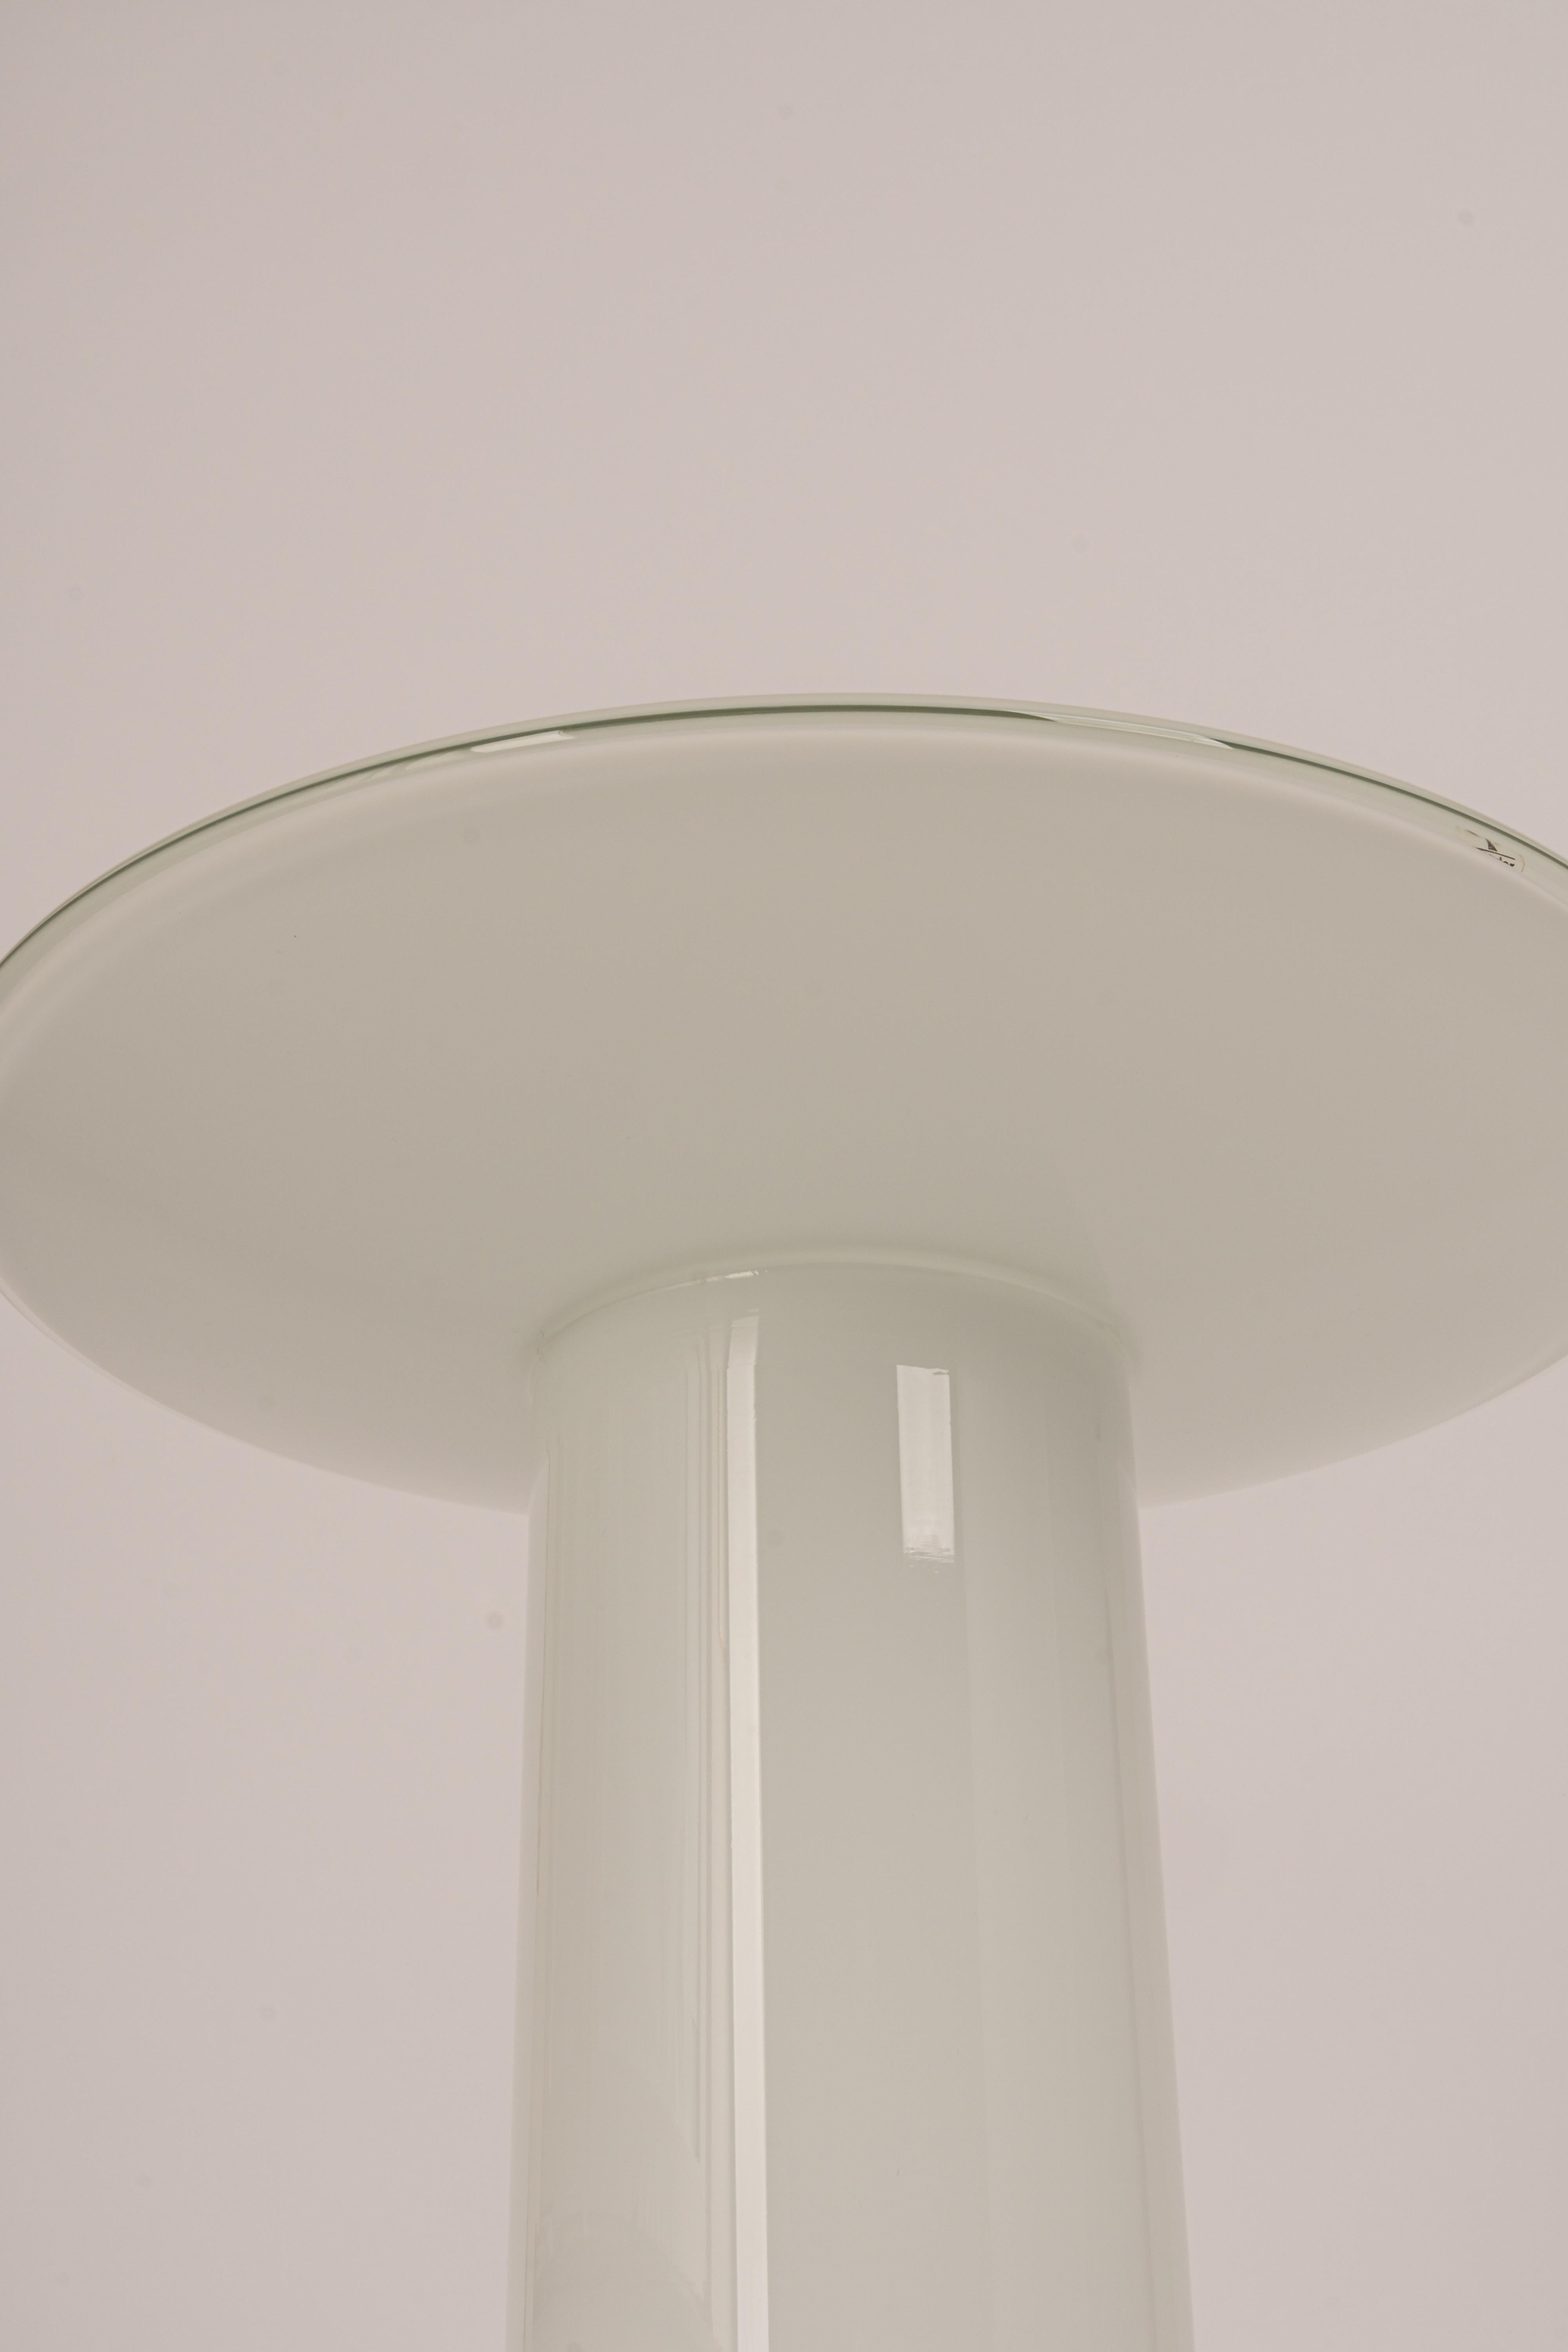 Wonderful mushroom table lamp by Peill & Putzler, Germany, 1970s. Made of a single piece.
Great glass body and its edgy quality contrast nicely with the smooth surface and shape of the mushroom. 

Measures: Large table lamp
Height 27 cm // 10.6